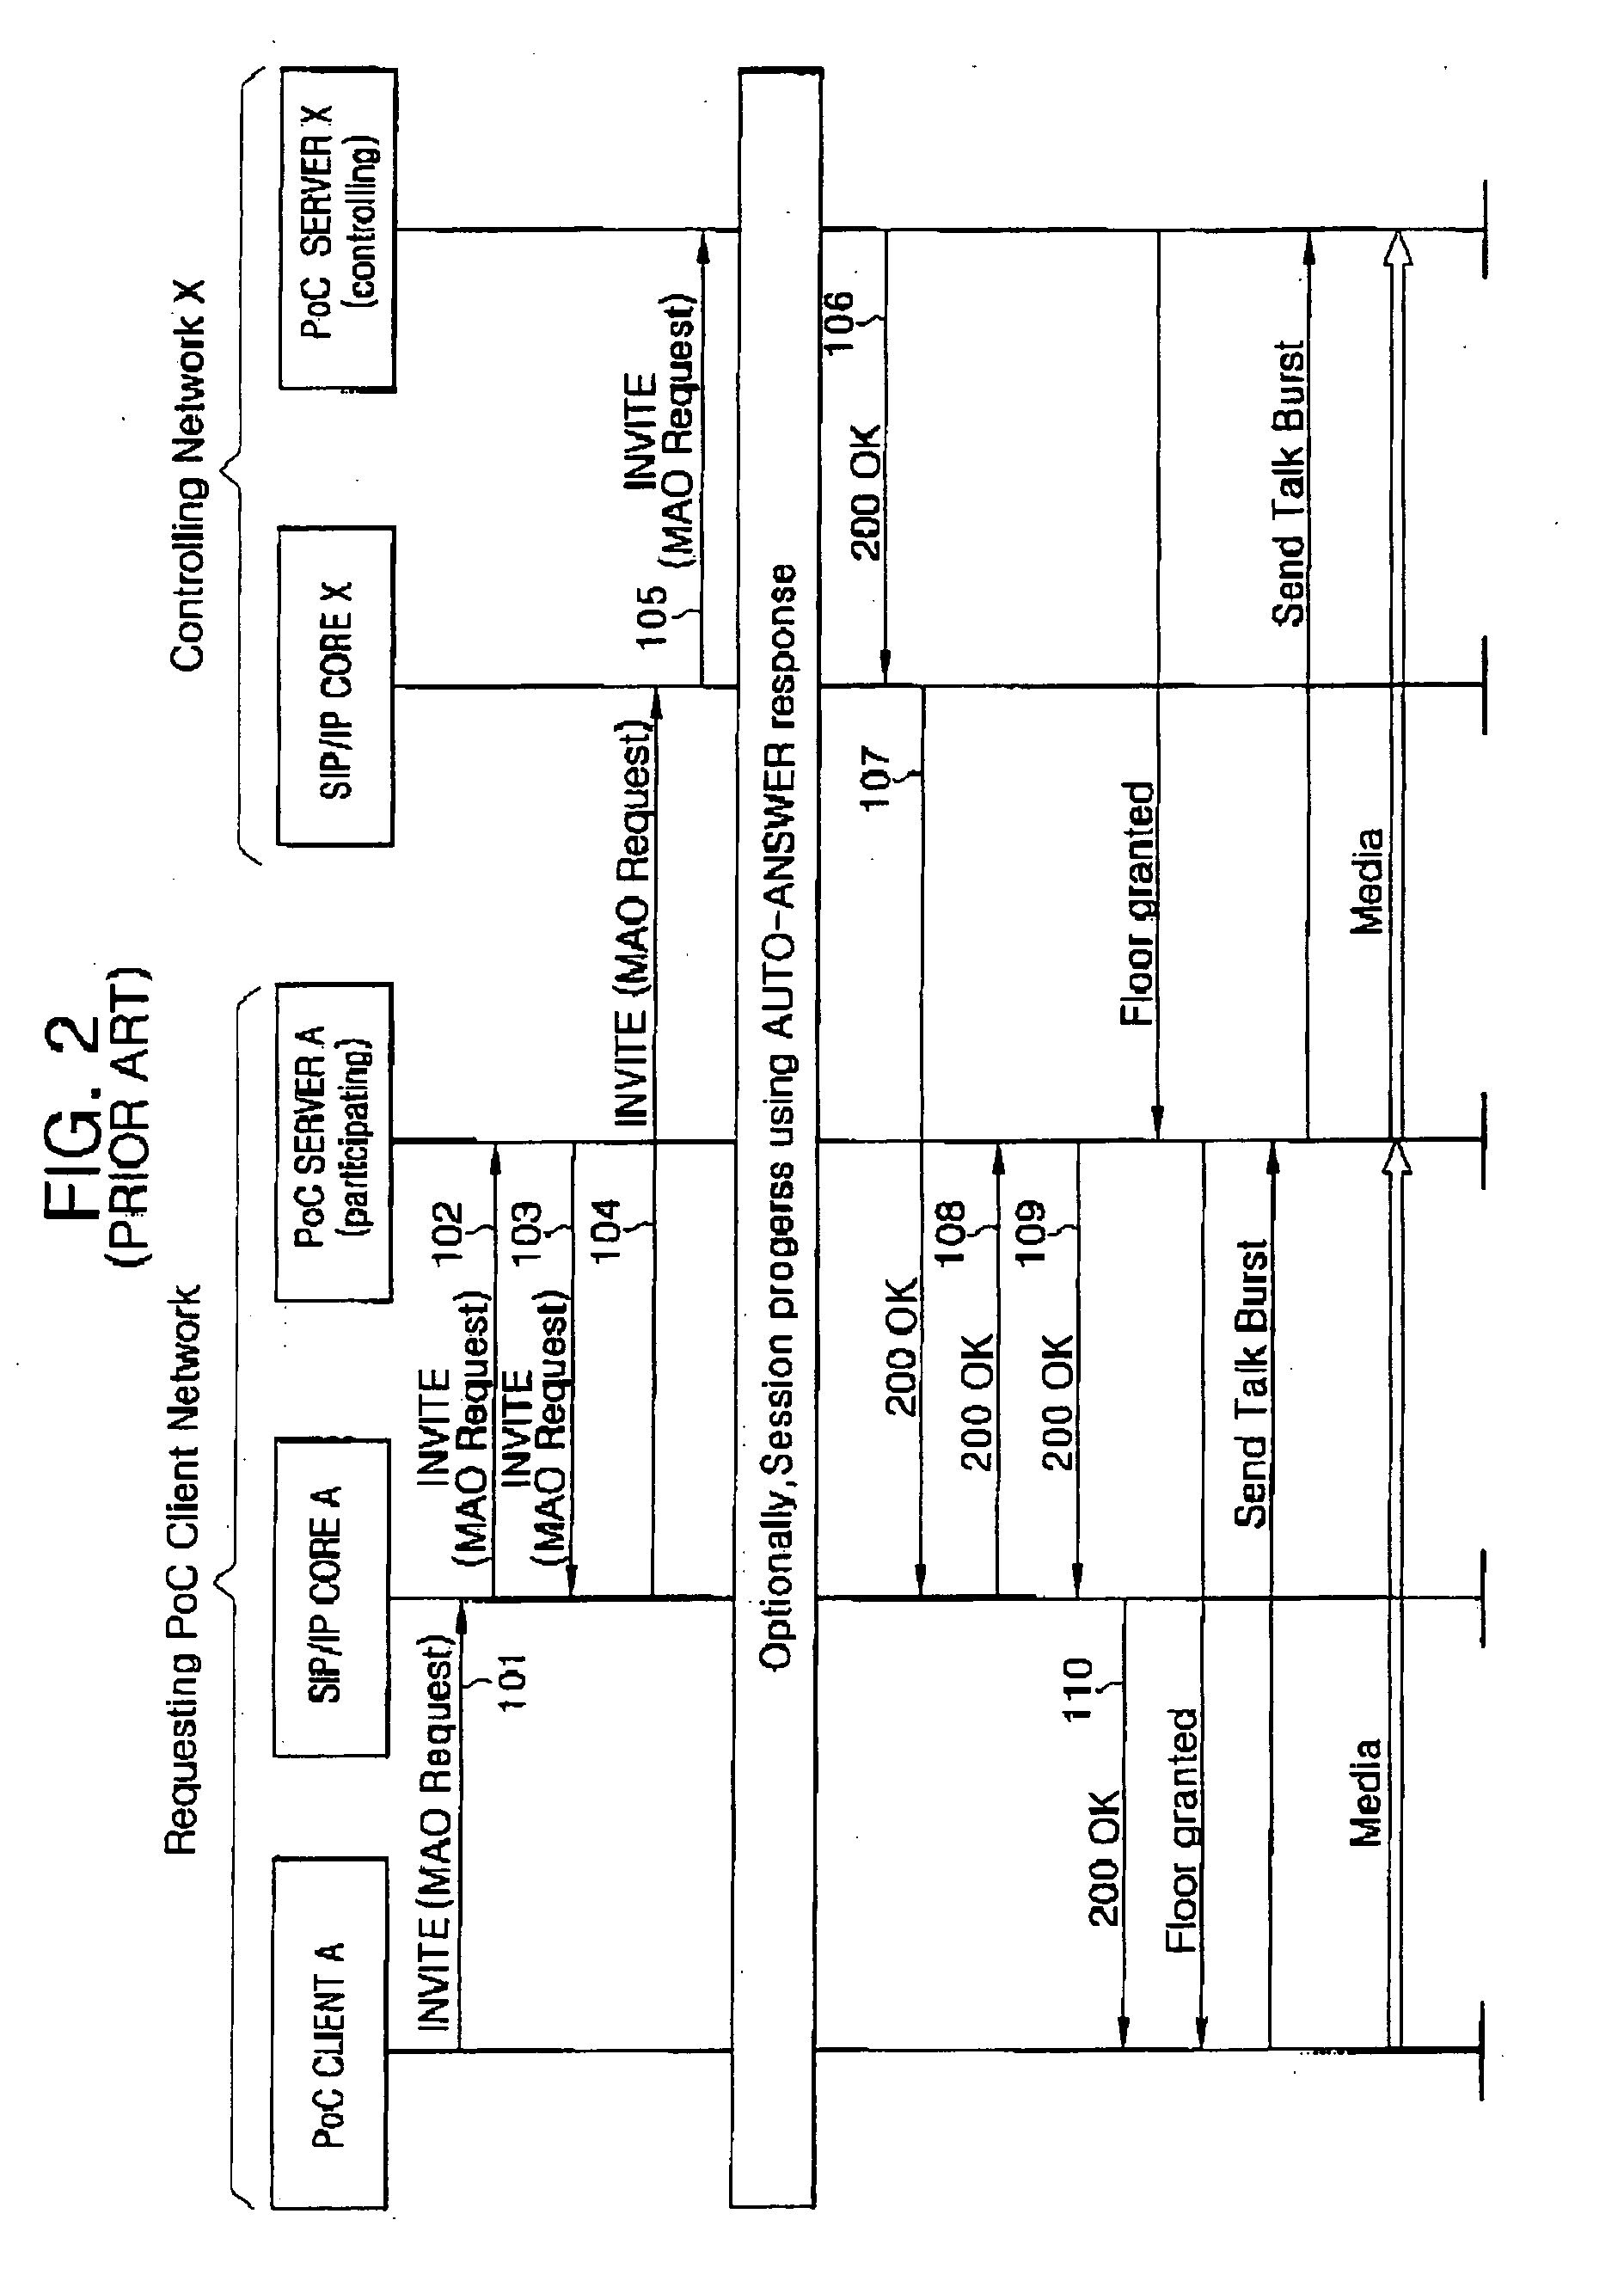 Call processing system and method based on answer mode of push to talk over cellular user